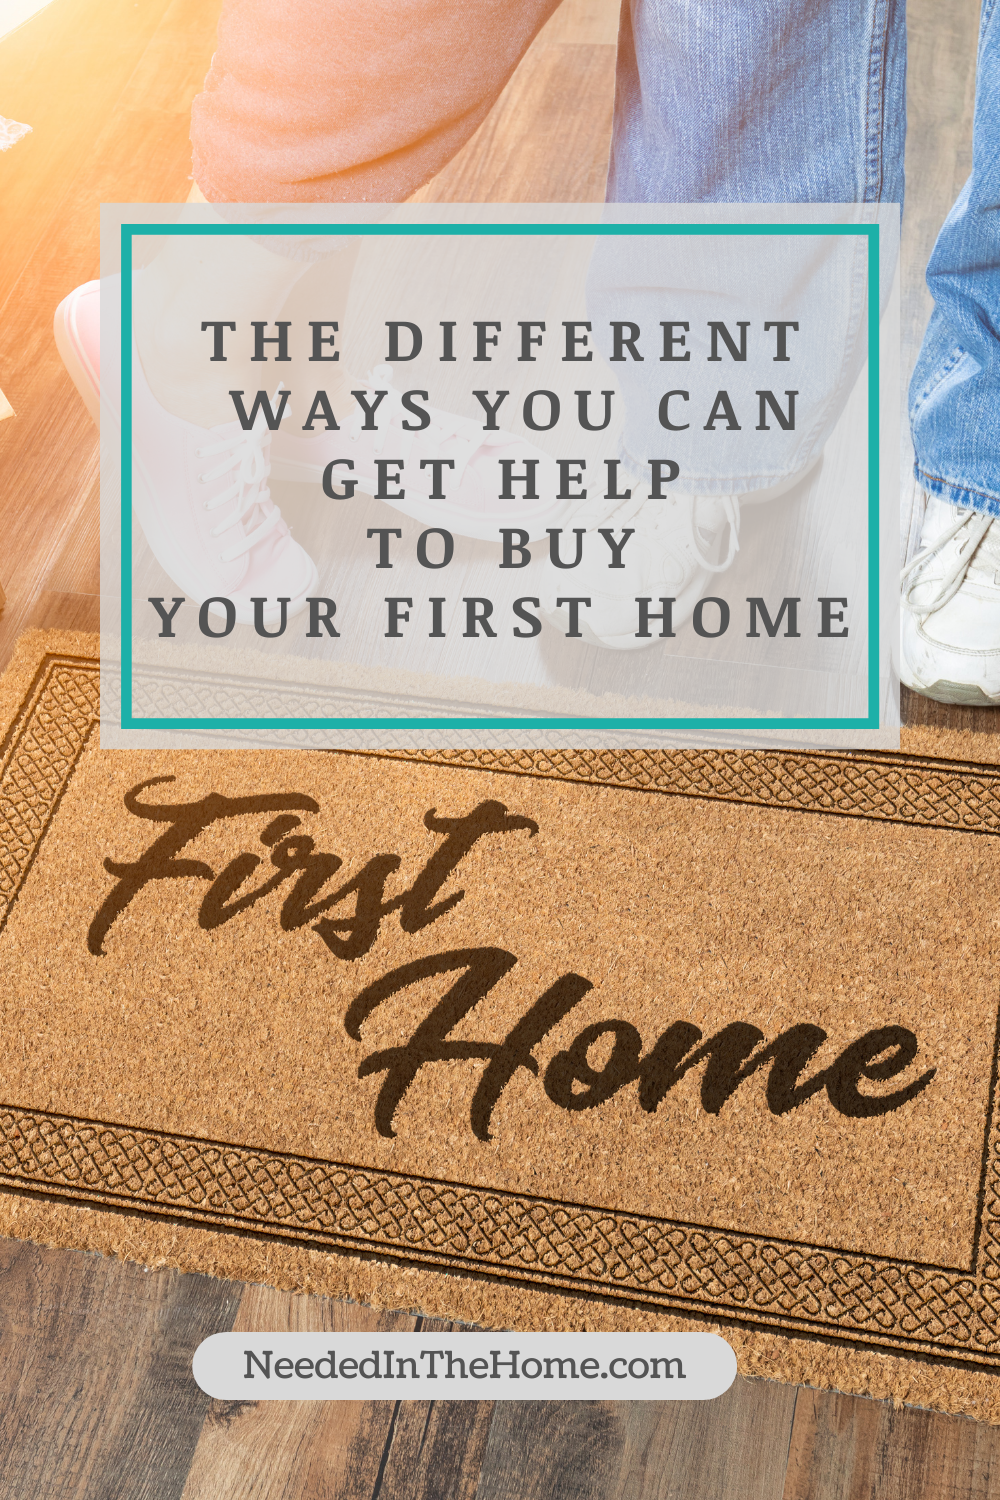 pinterest-pin-description the different ways you can get help to buy your first home couples feet near door mat neededinthehome